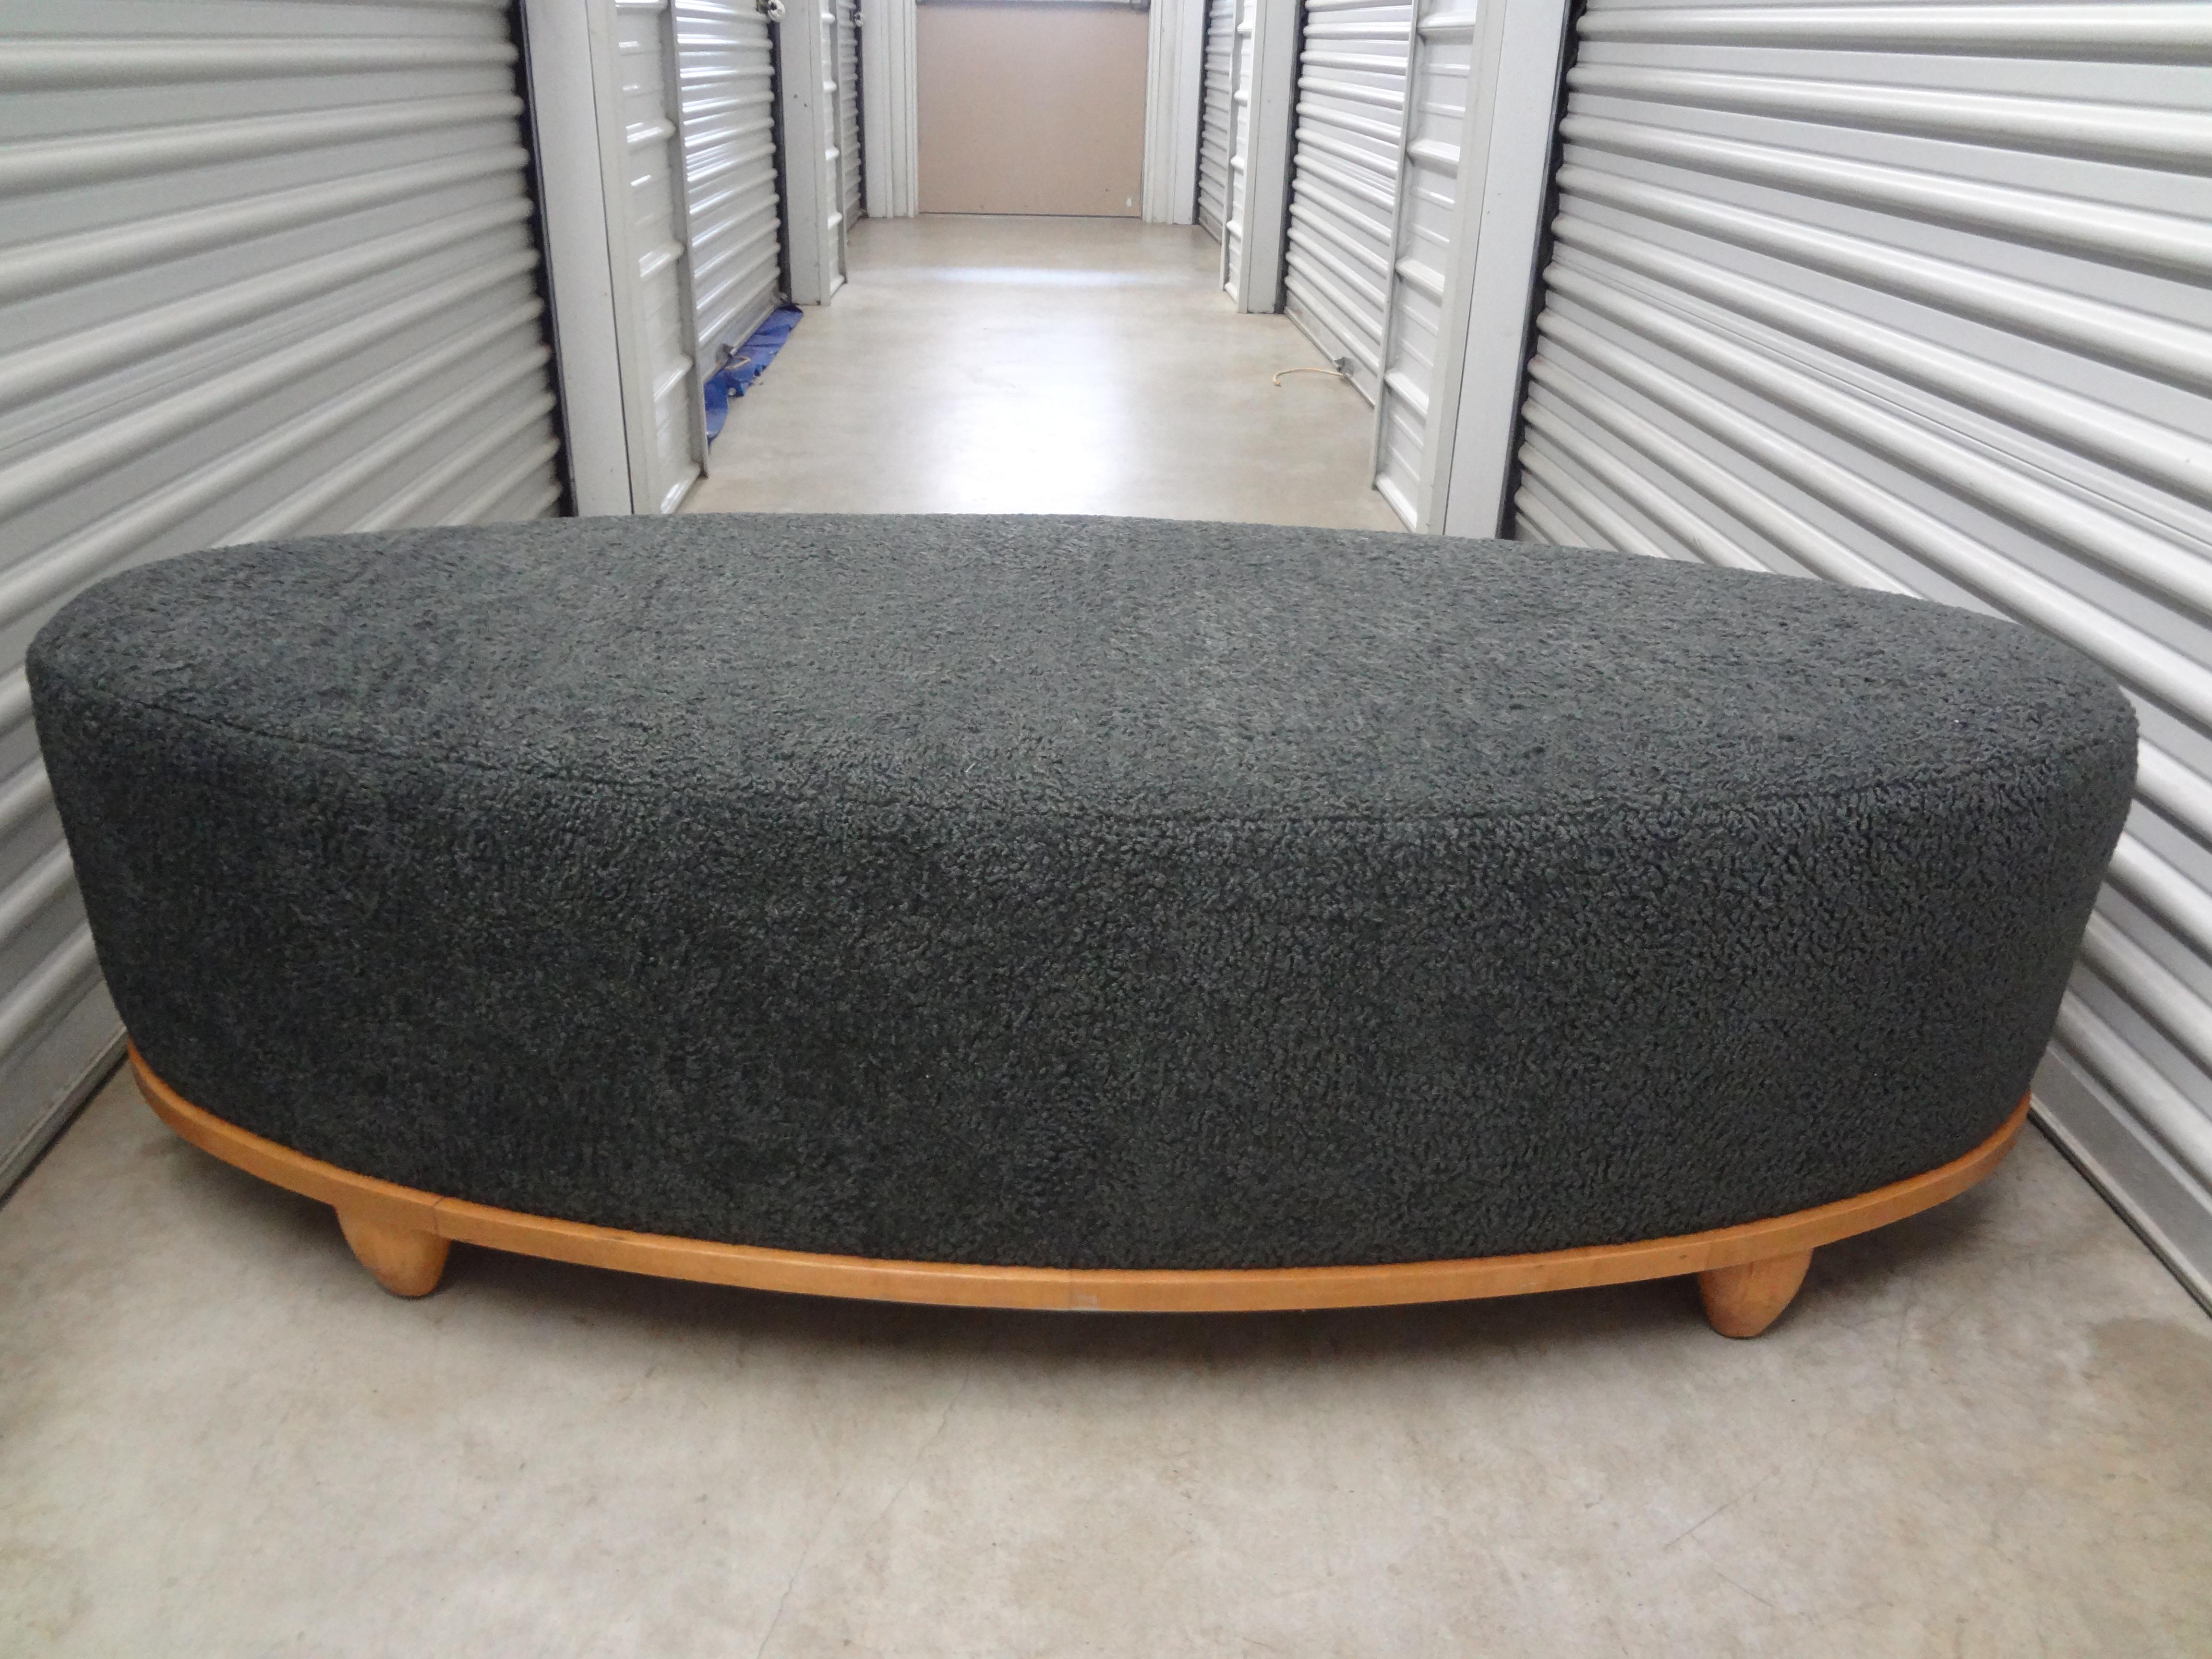 Stunning large mid-century oval bench professionally upholstered in grey shearling. This handsome bench, ottoman or poof is both comfortable and beautiful from every angle. Perfect used floating in a room.